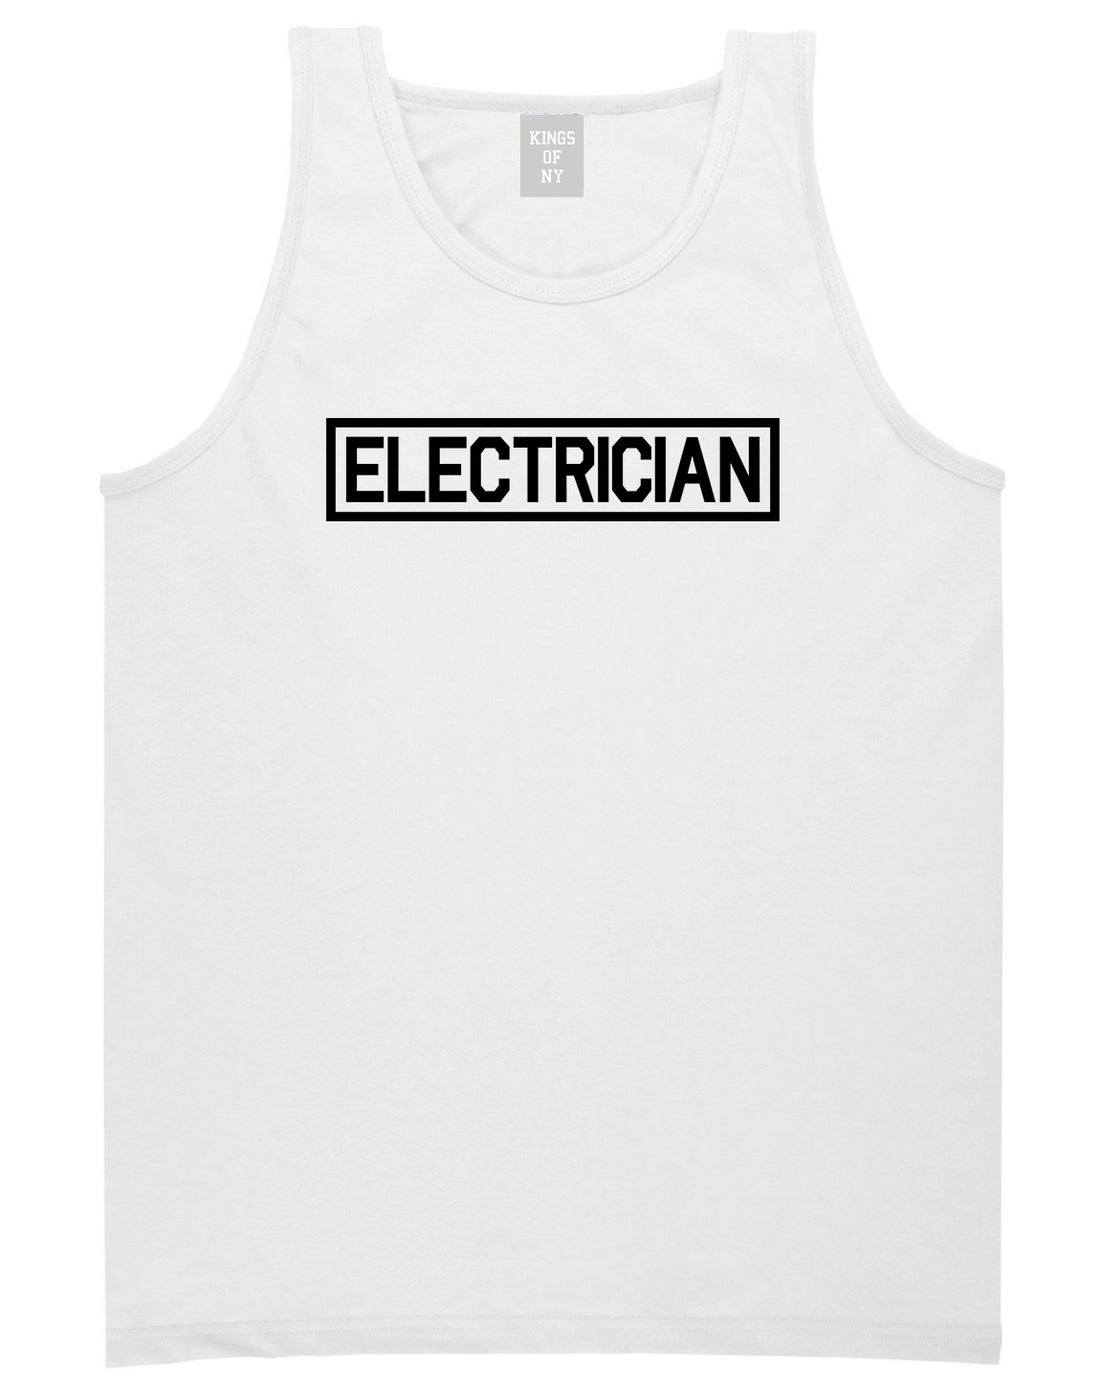 Electrician_Occupation Mens White Tank Top Shirt by Kings Of NY